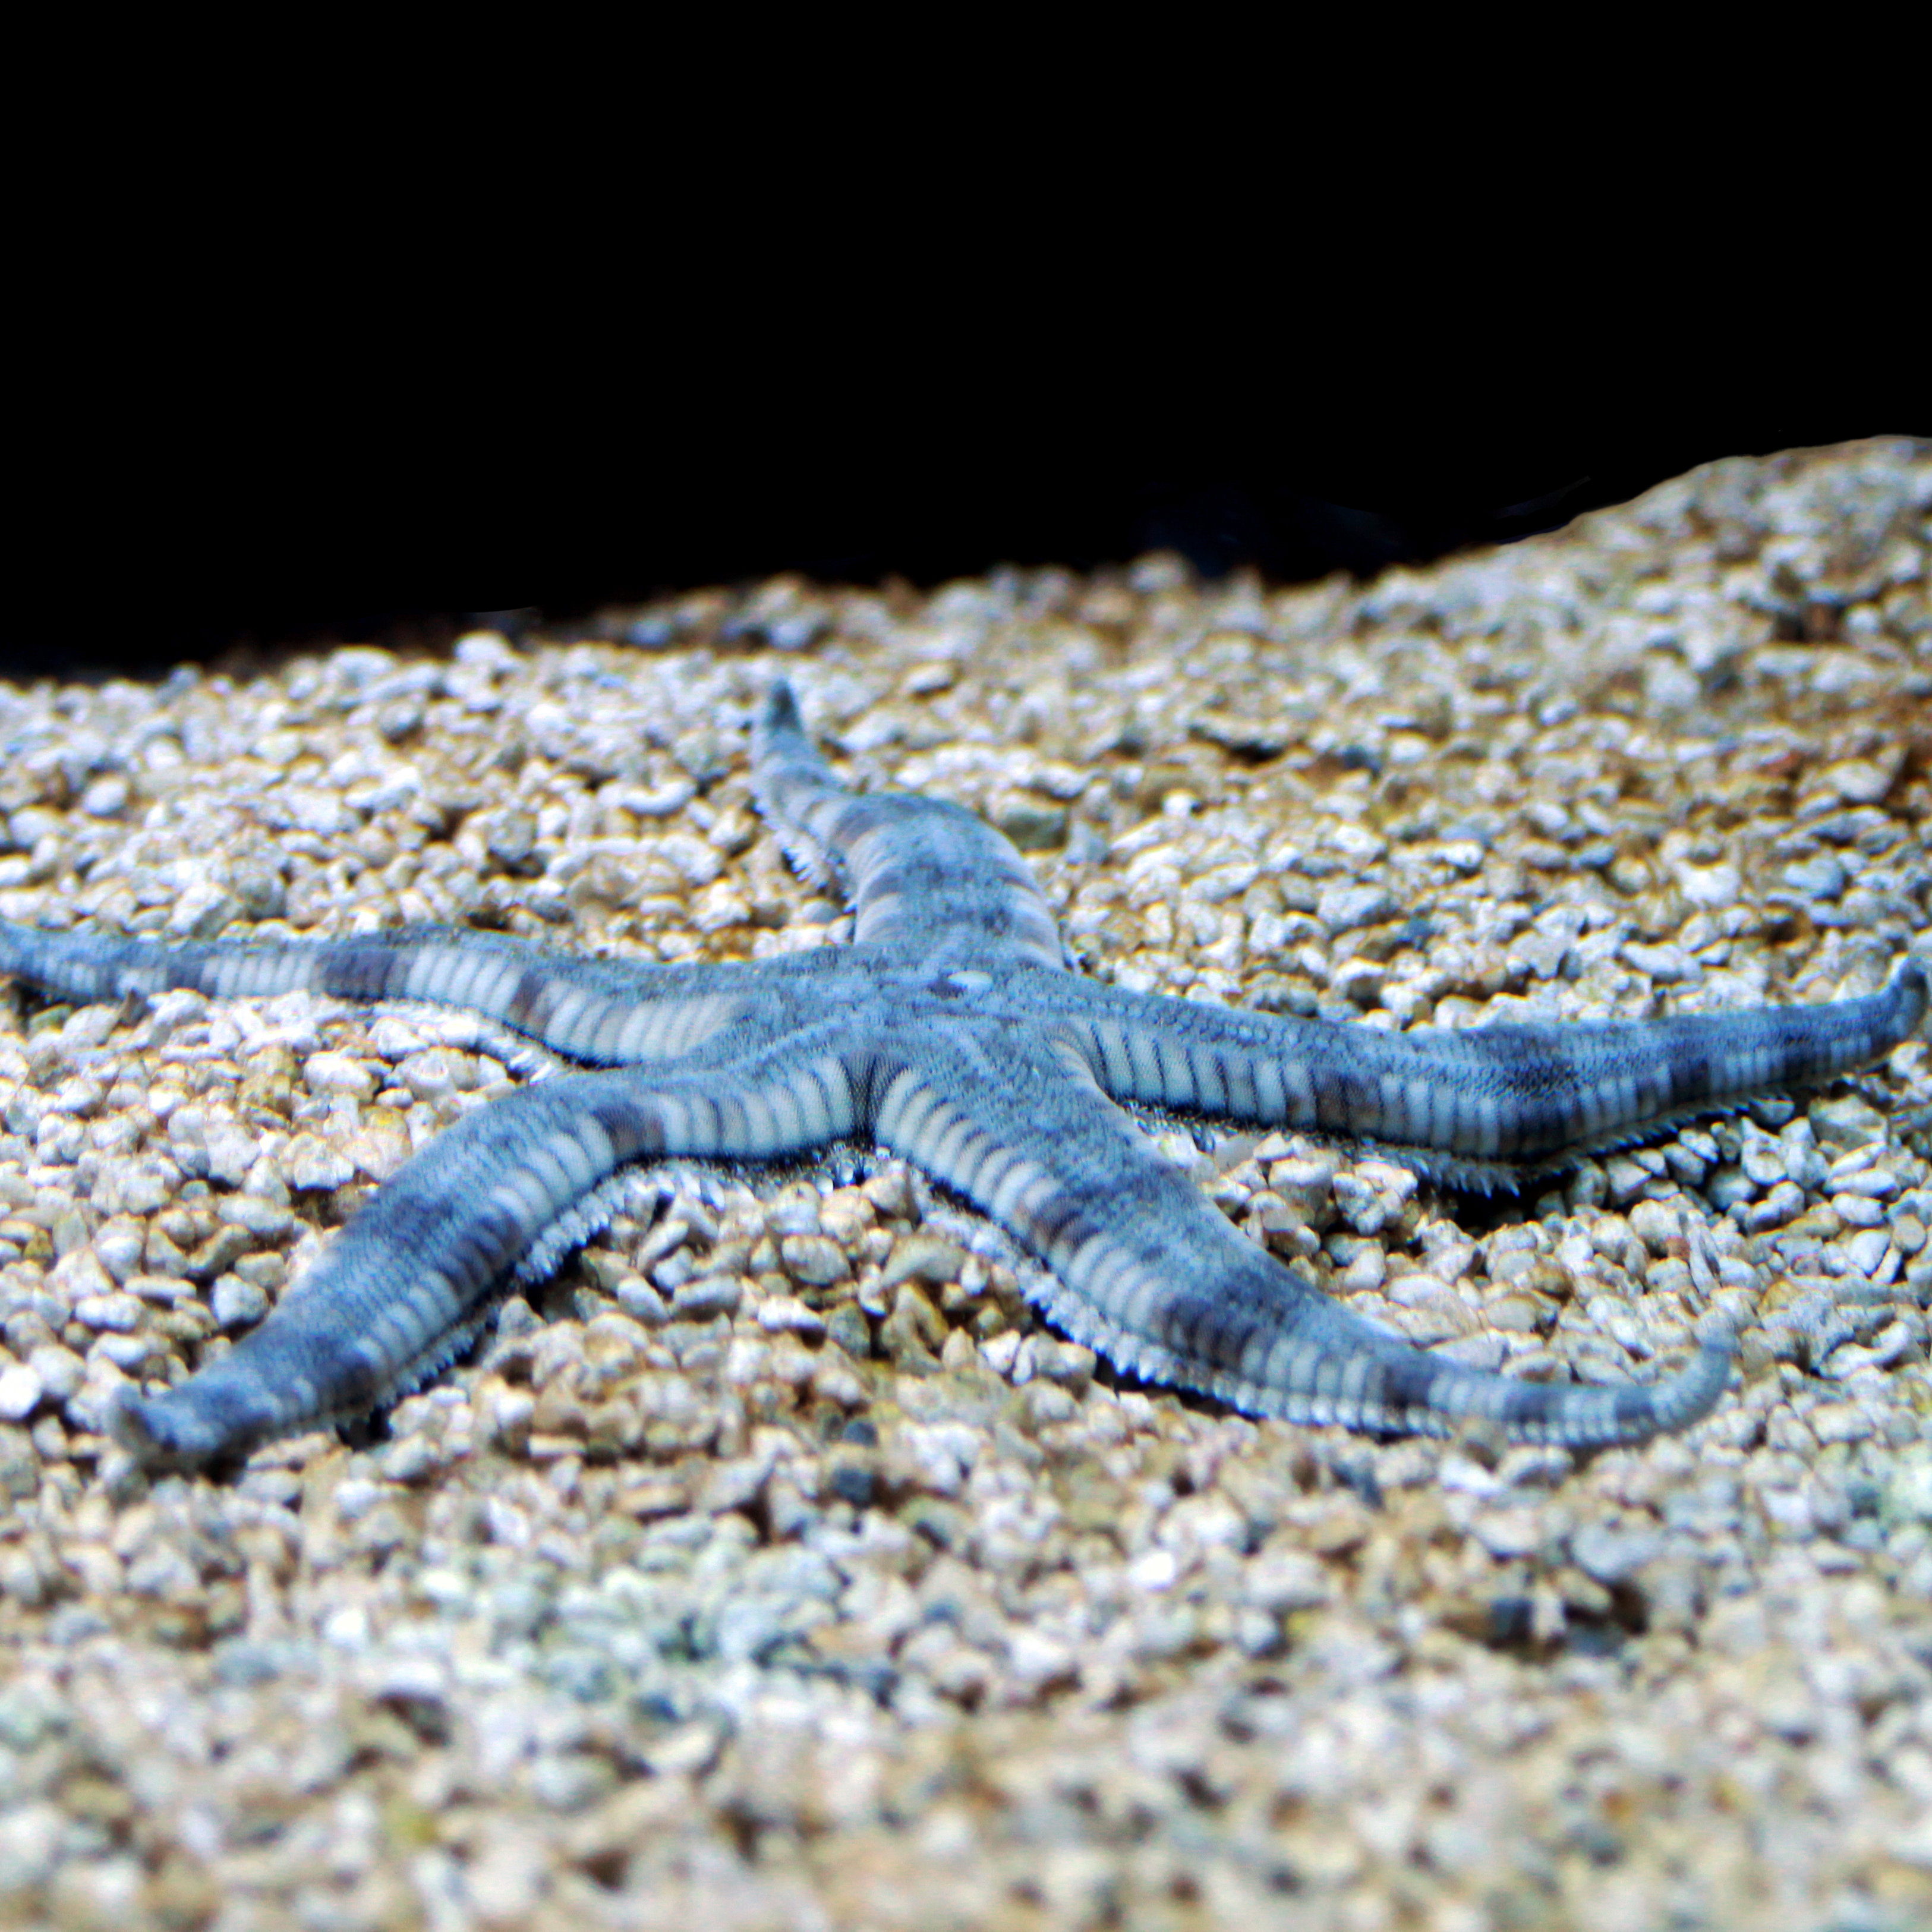 The Beneficial White Sand Sifting Starfish (Archaster typicus)